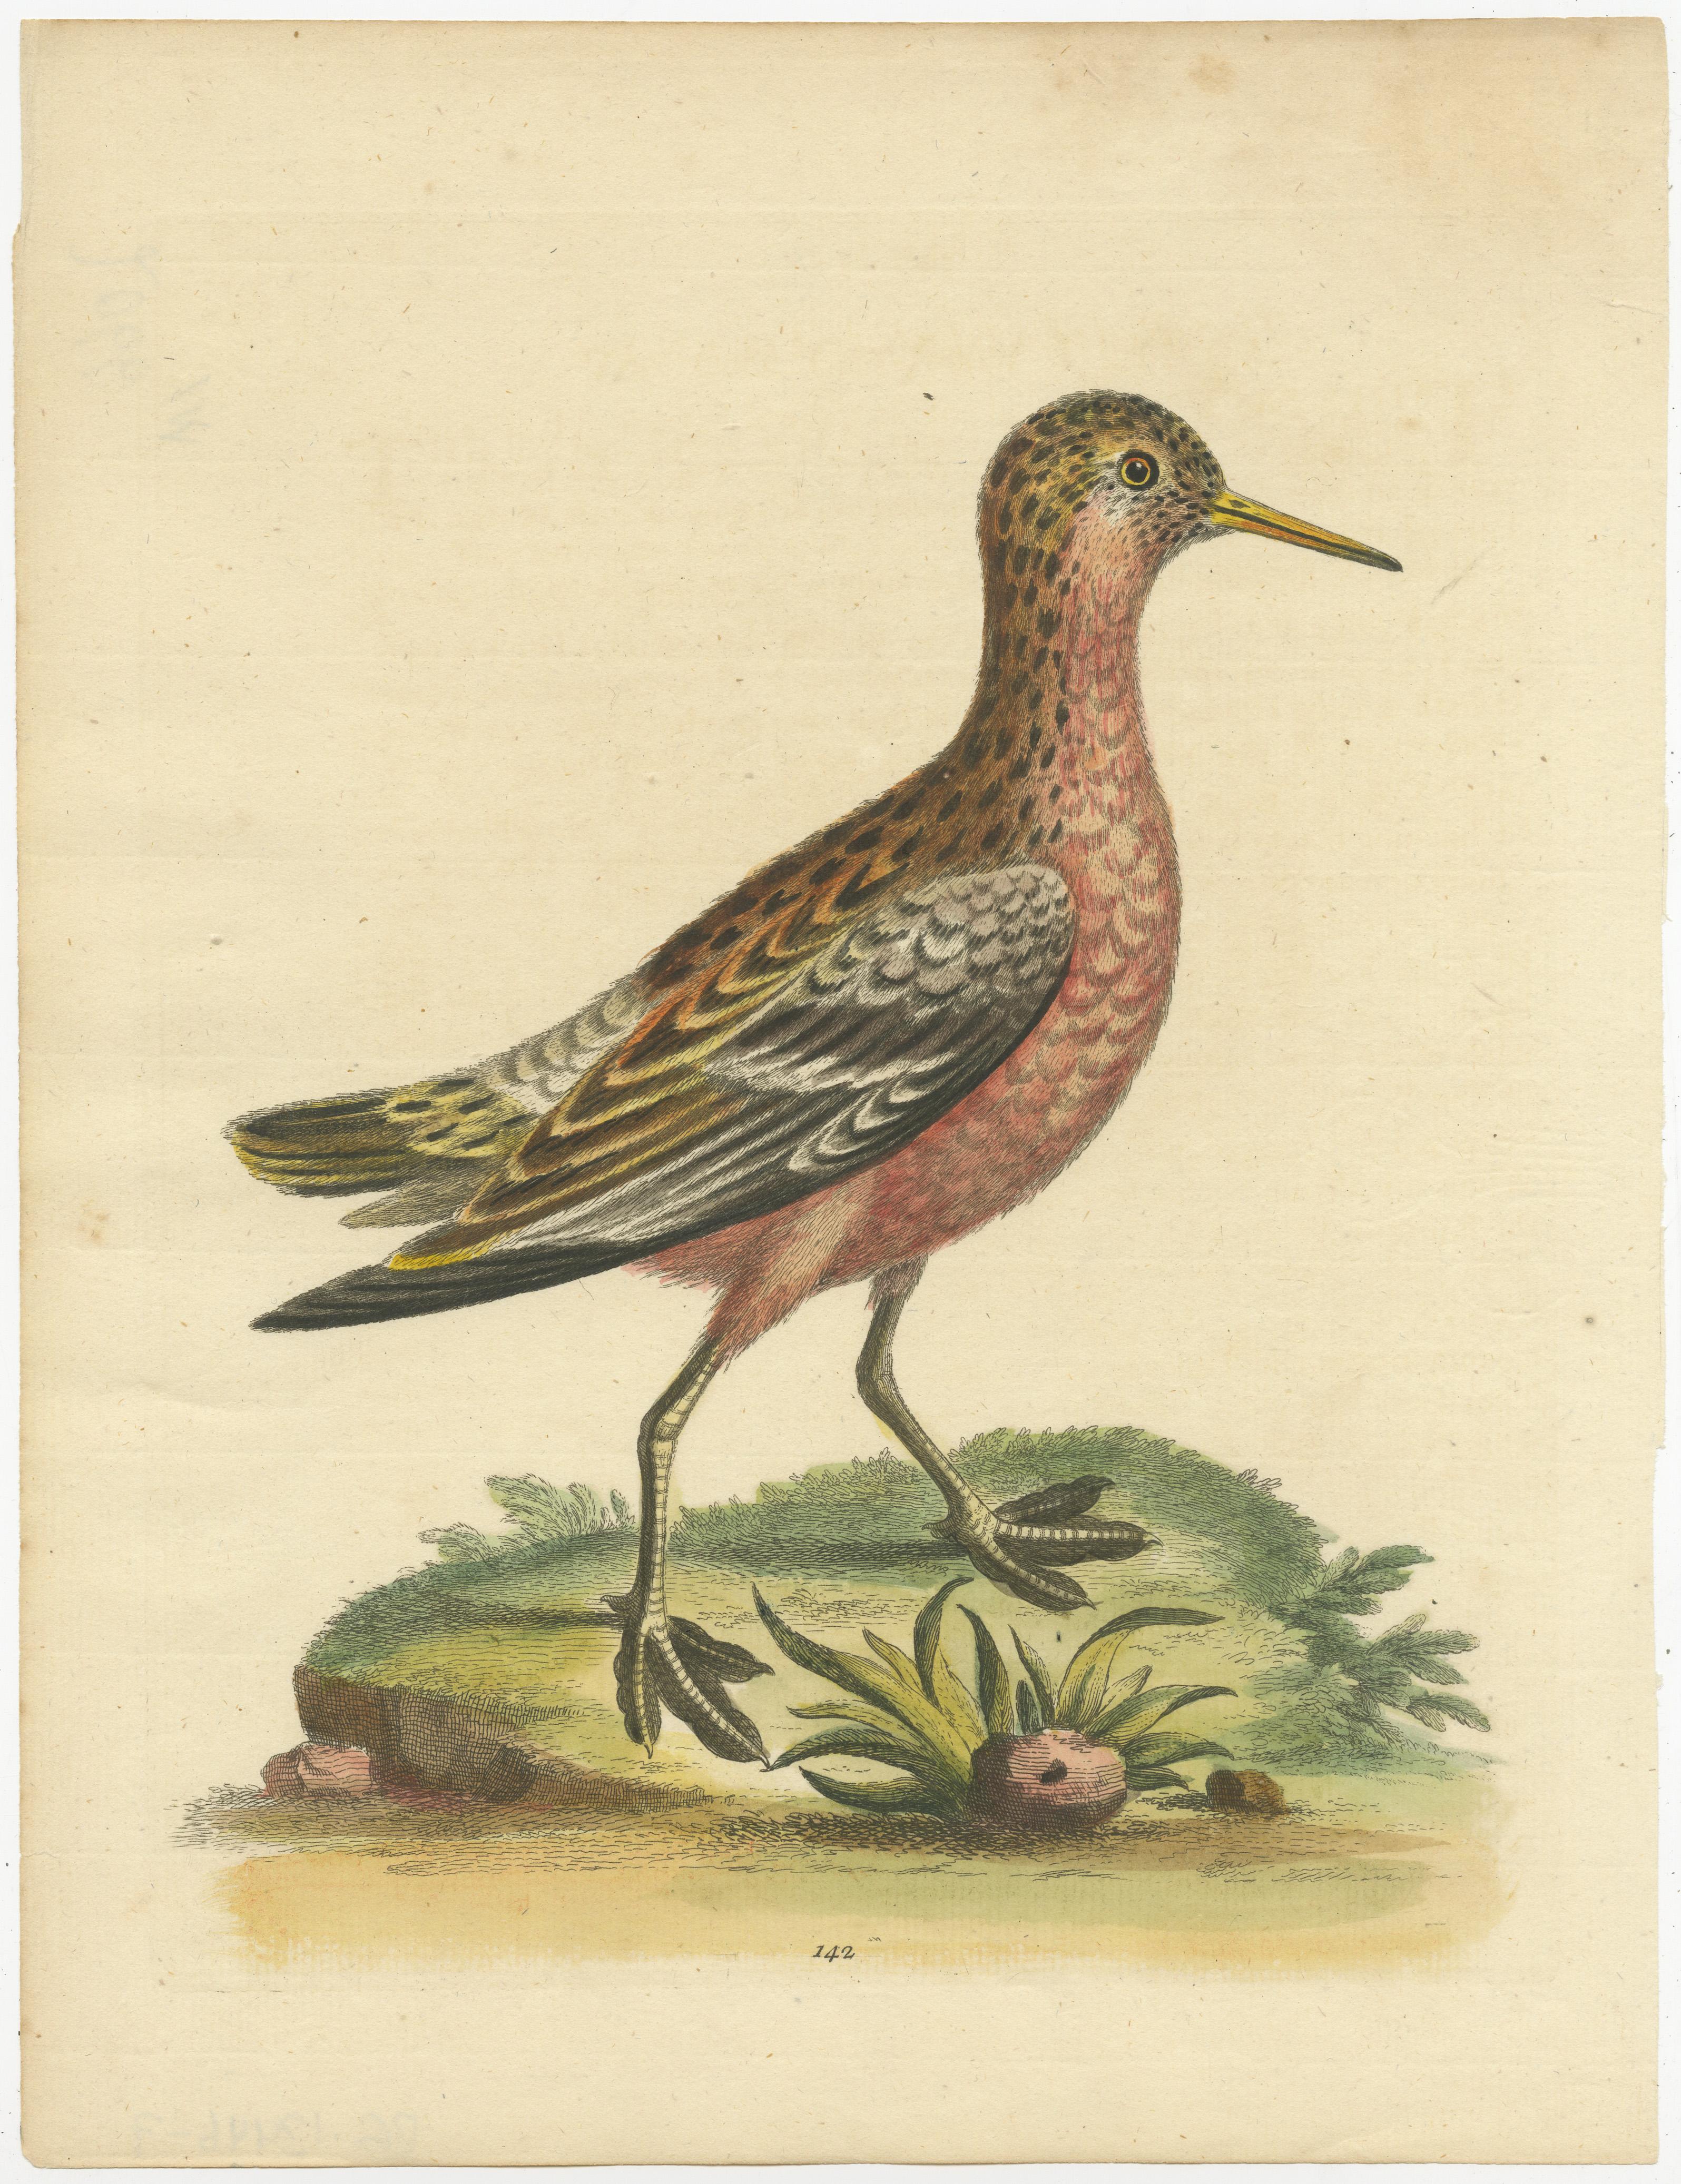 Original antique bird print of a sandpiper. This print originates from 'Natural History of Uncommon Birds' by George Edwards. Published 1743-51. 

George Edwards FRS (3 April 1694 – 23 July 1773) was an English naturalist and ornithologist, known as